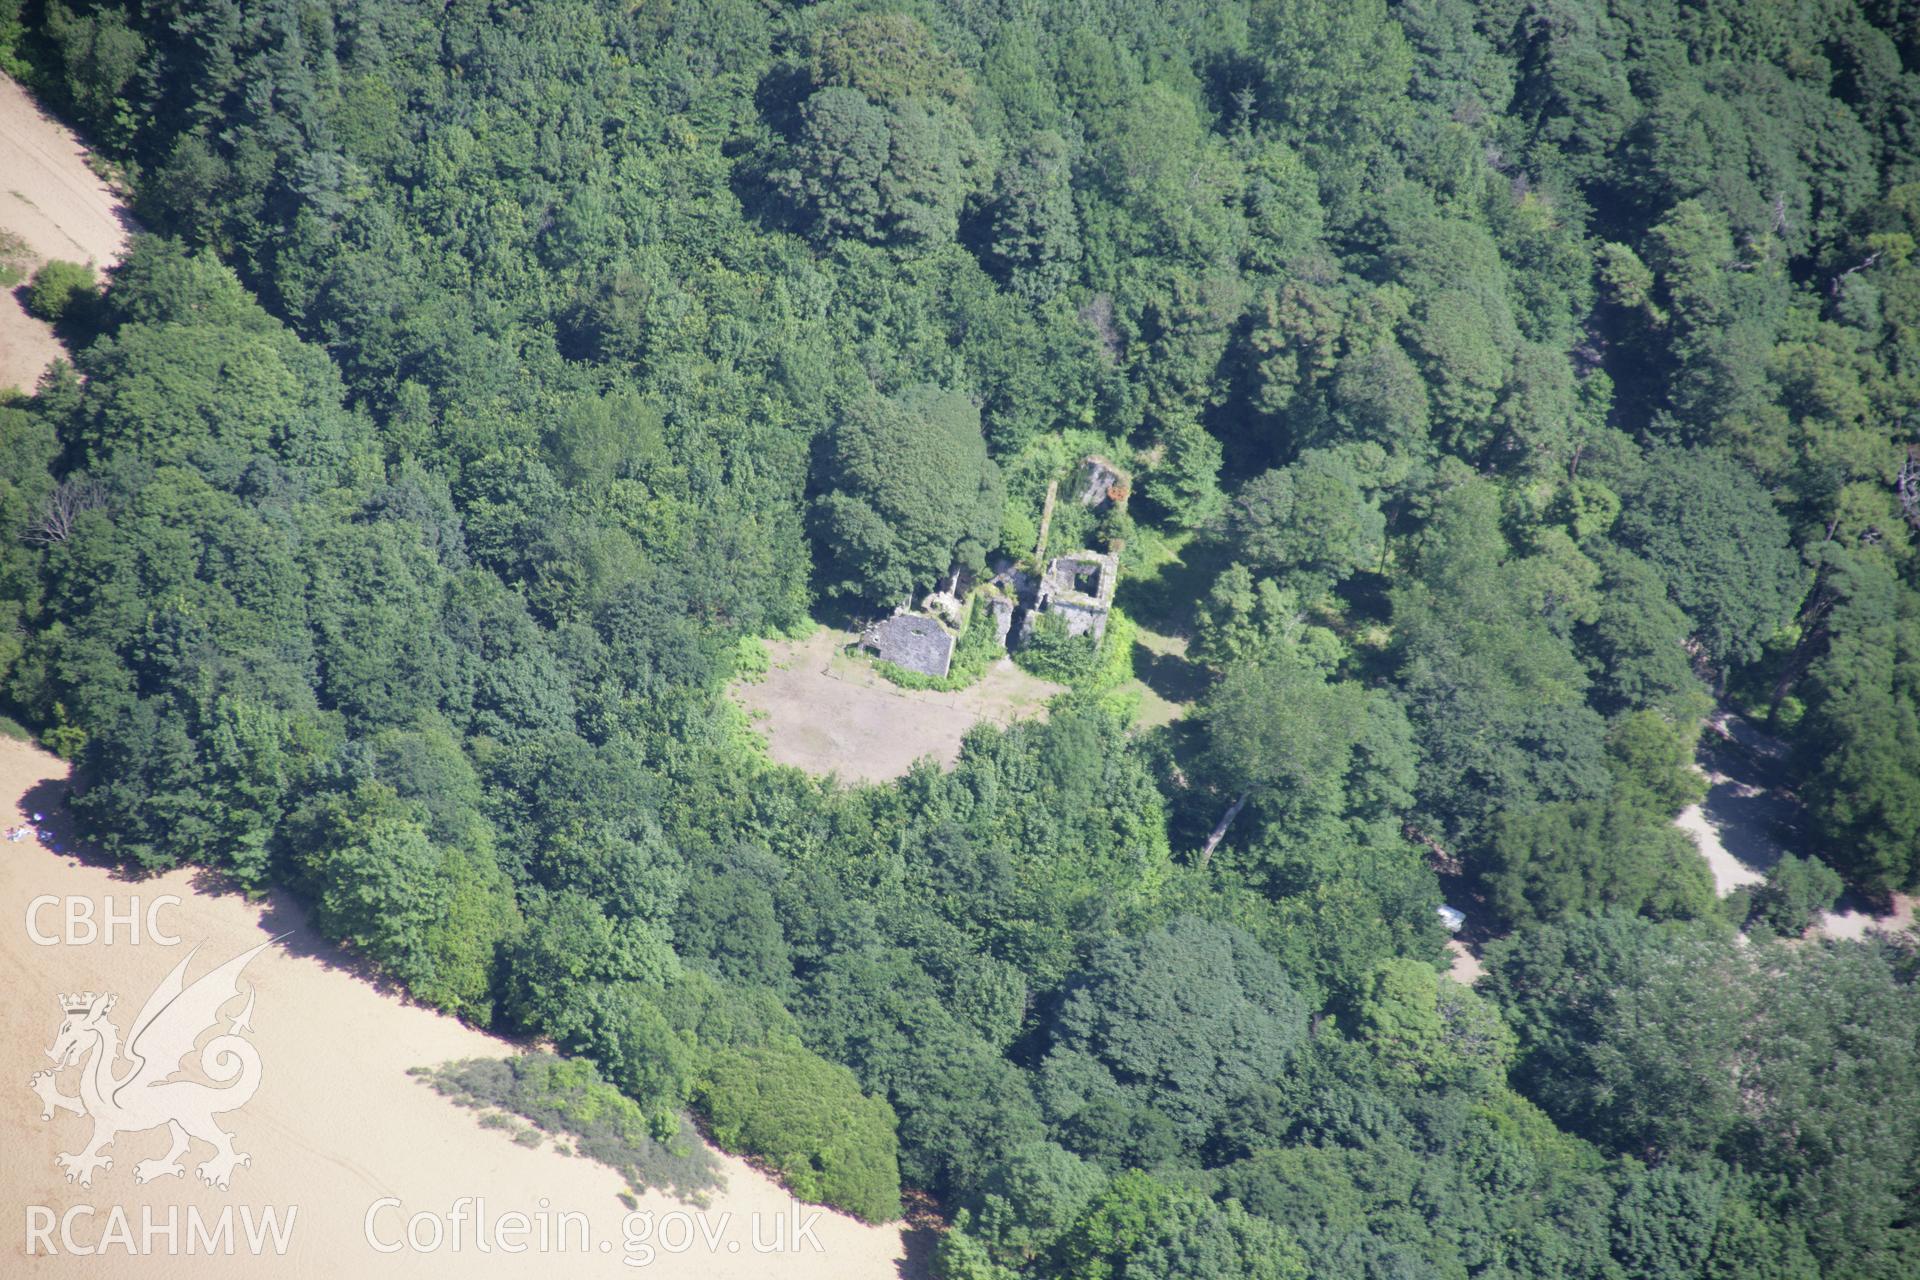 RCAHMW colour oblique aerial photograph of Candleston Castle. Taken on 24 July 2006 by Toby Driver